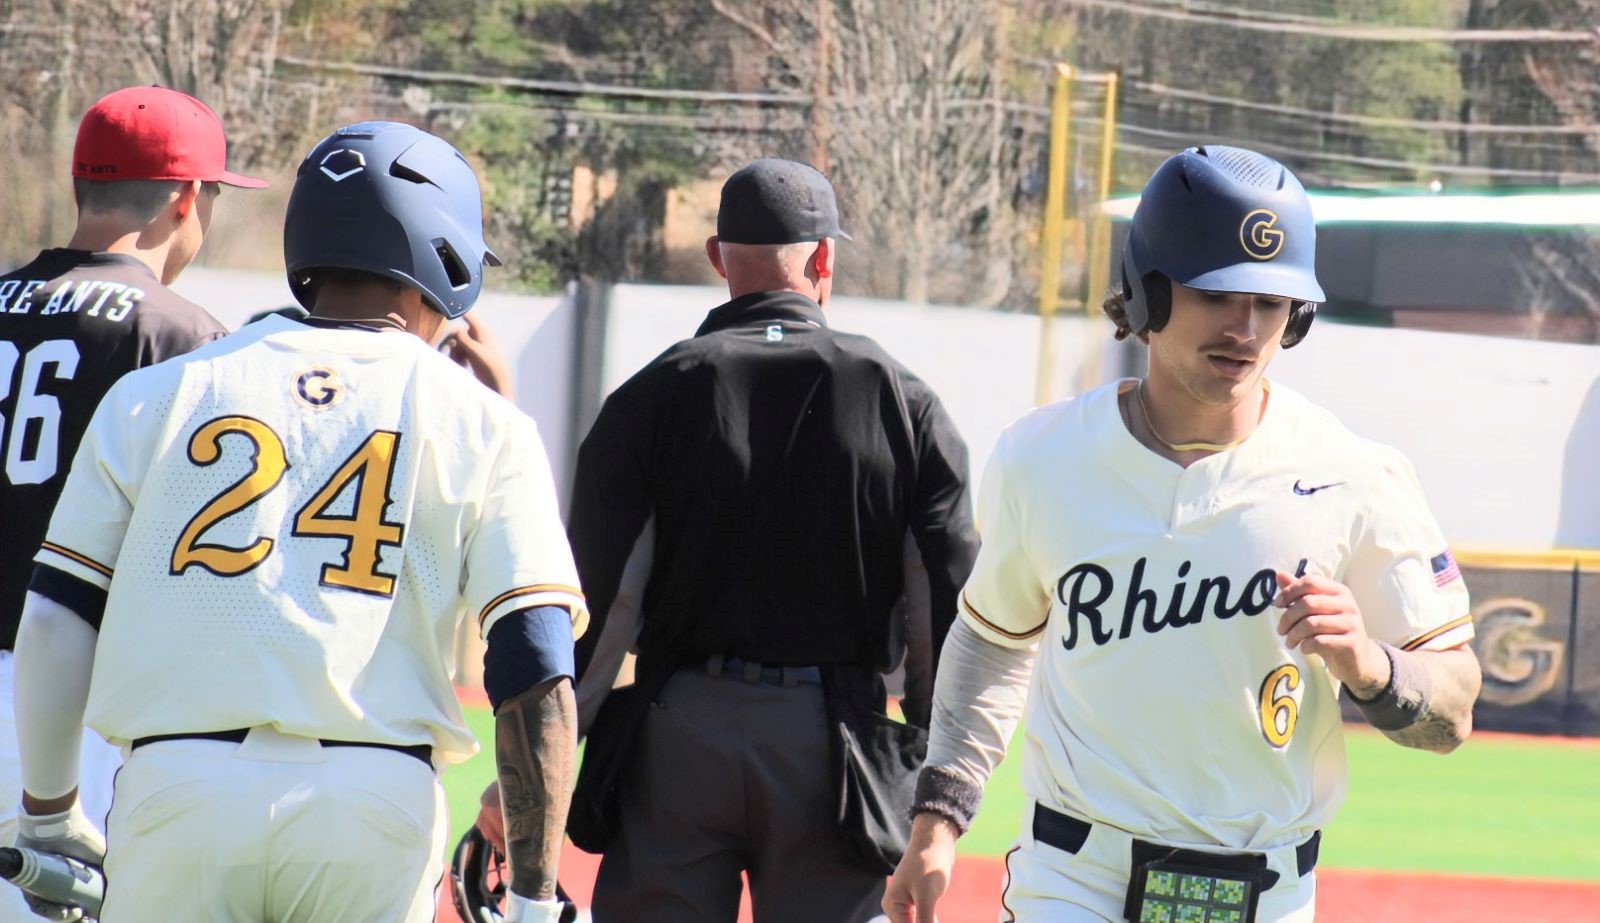 Ben Karpowicz (right) had four hits and eight RBIs in Gaston College's Sunday doubleheader sweep at USC Lancaster.